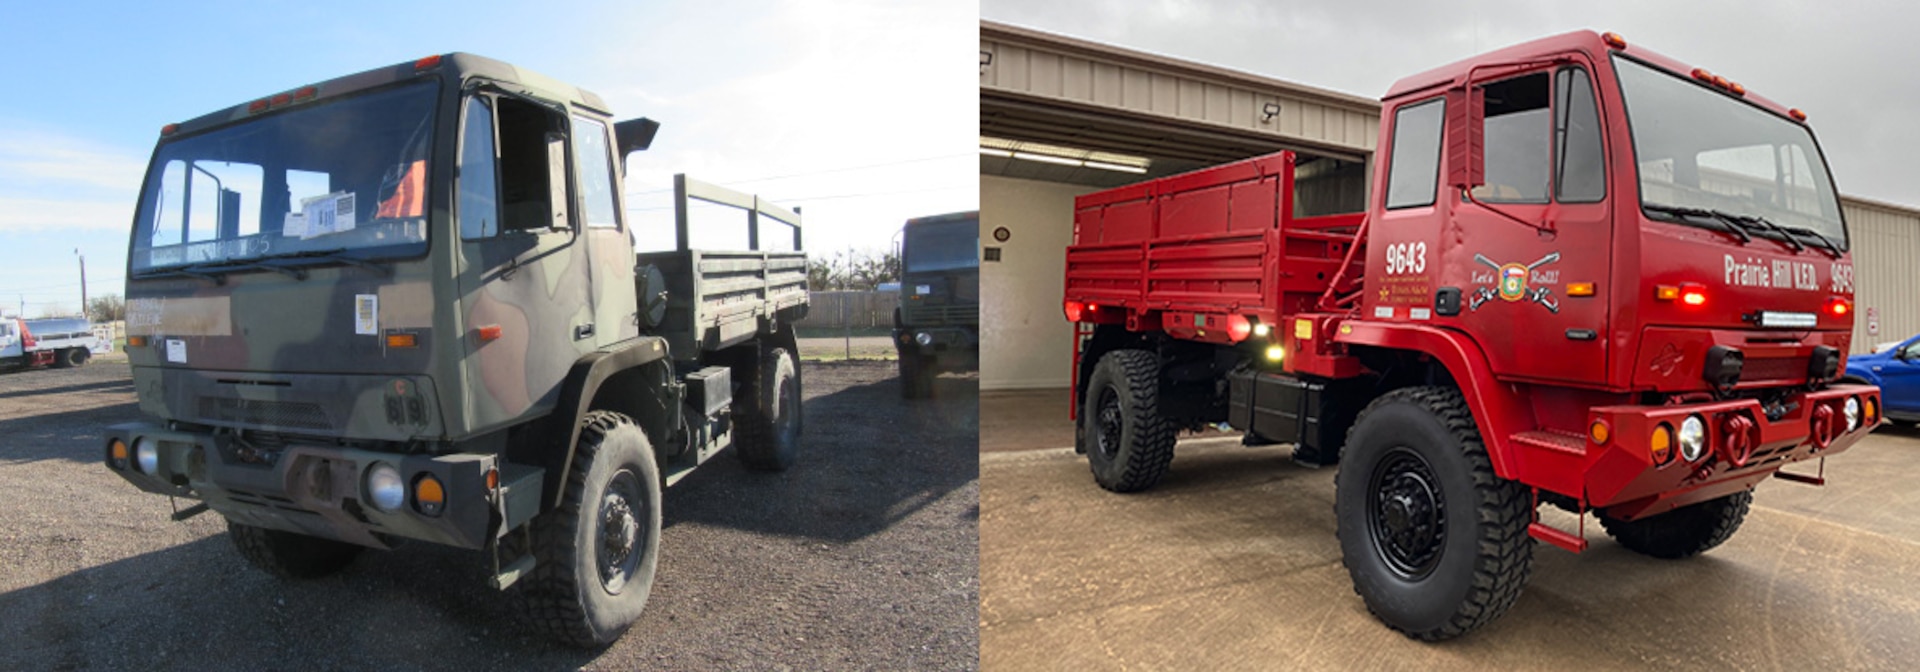 A view of a green military truck and a view of the same truck but now red after being converted into a firetruck.